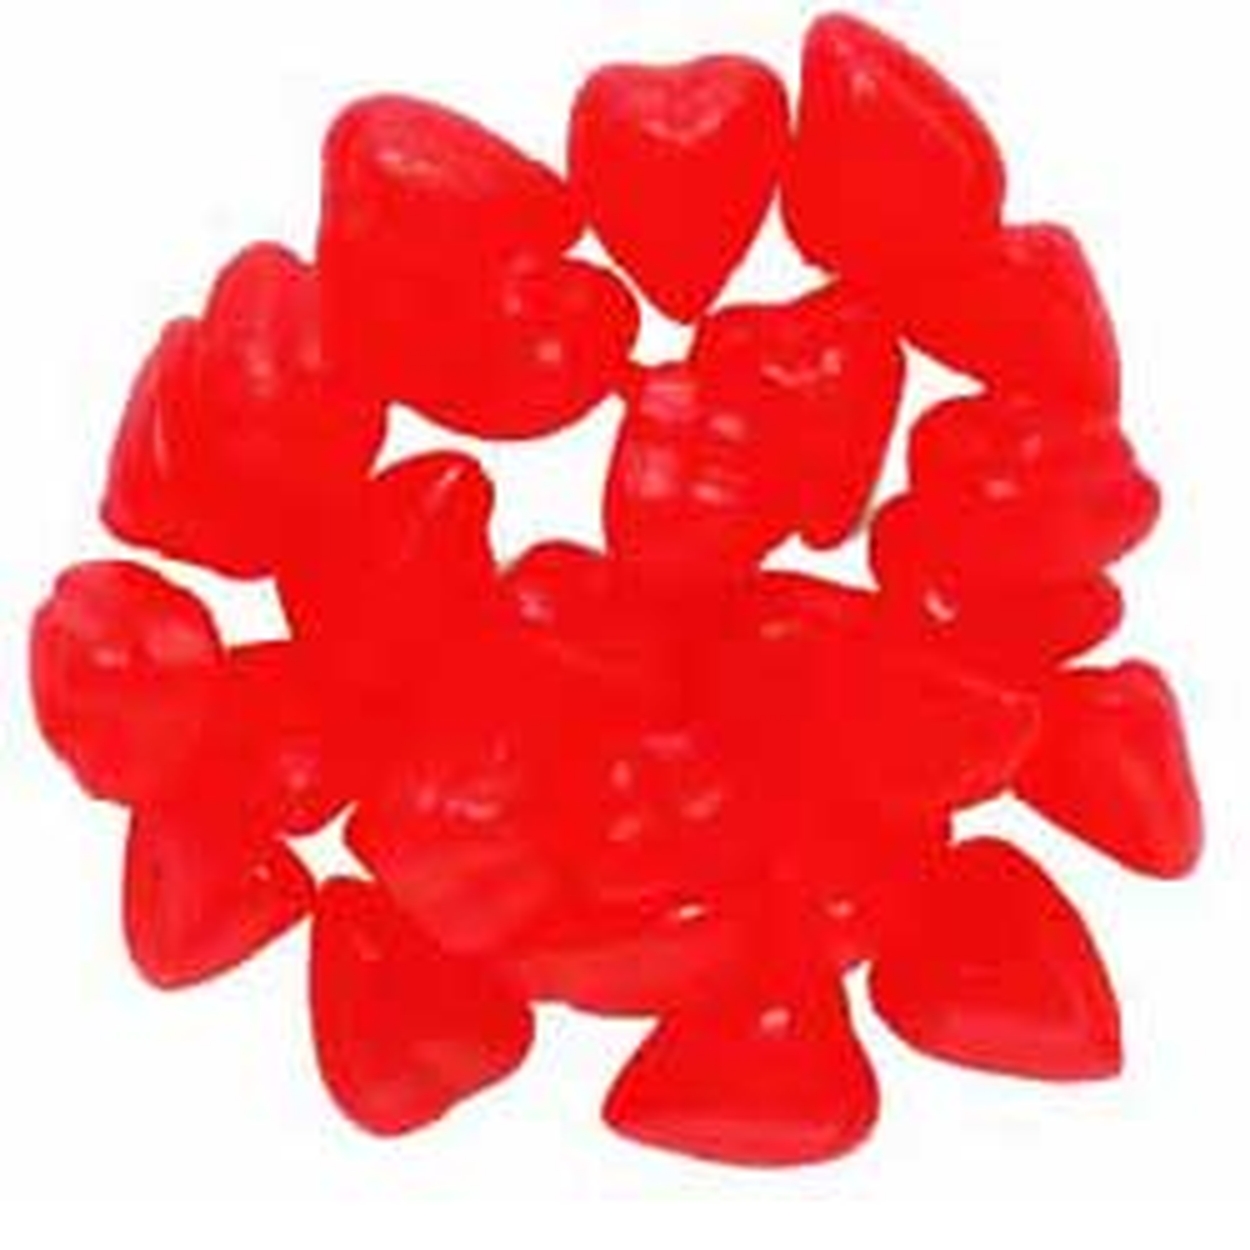 Cherry JuJu Hearts • Gummies & Jelly Candy • Bulk Candy • Oh! Nuts®